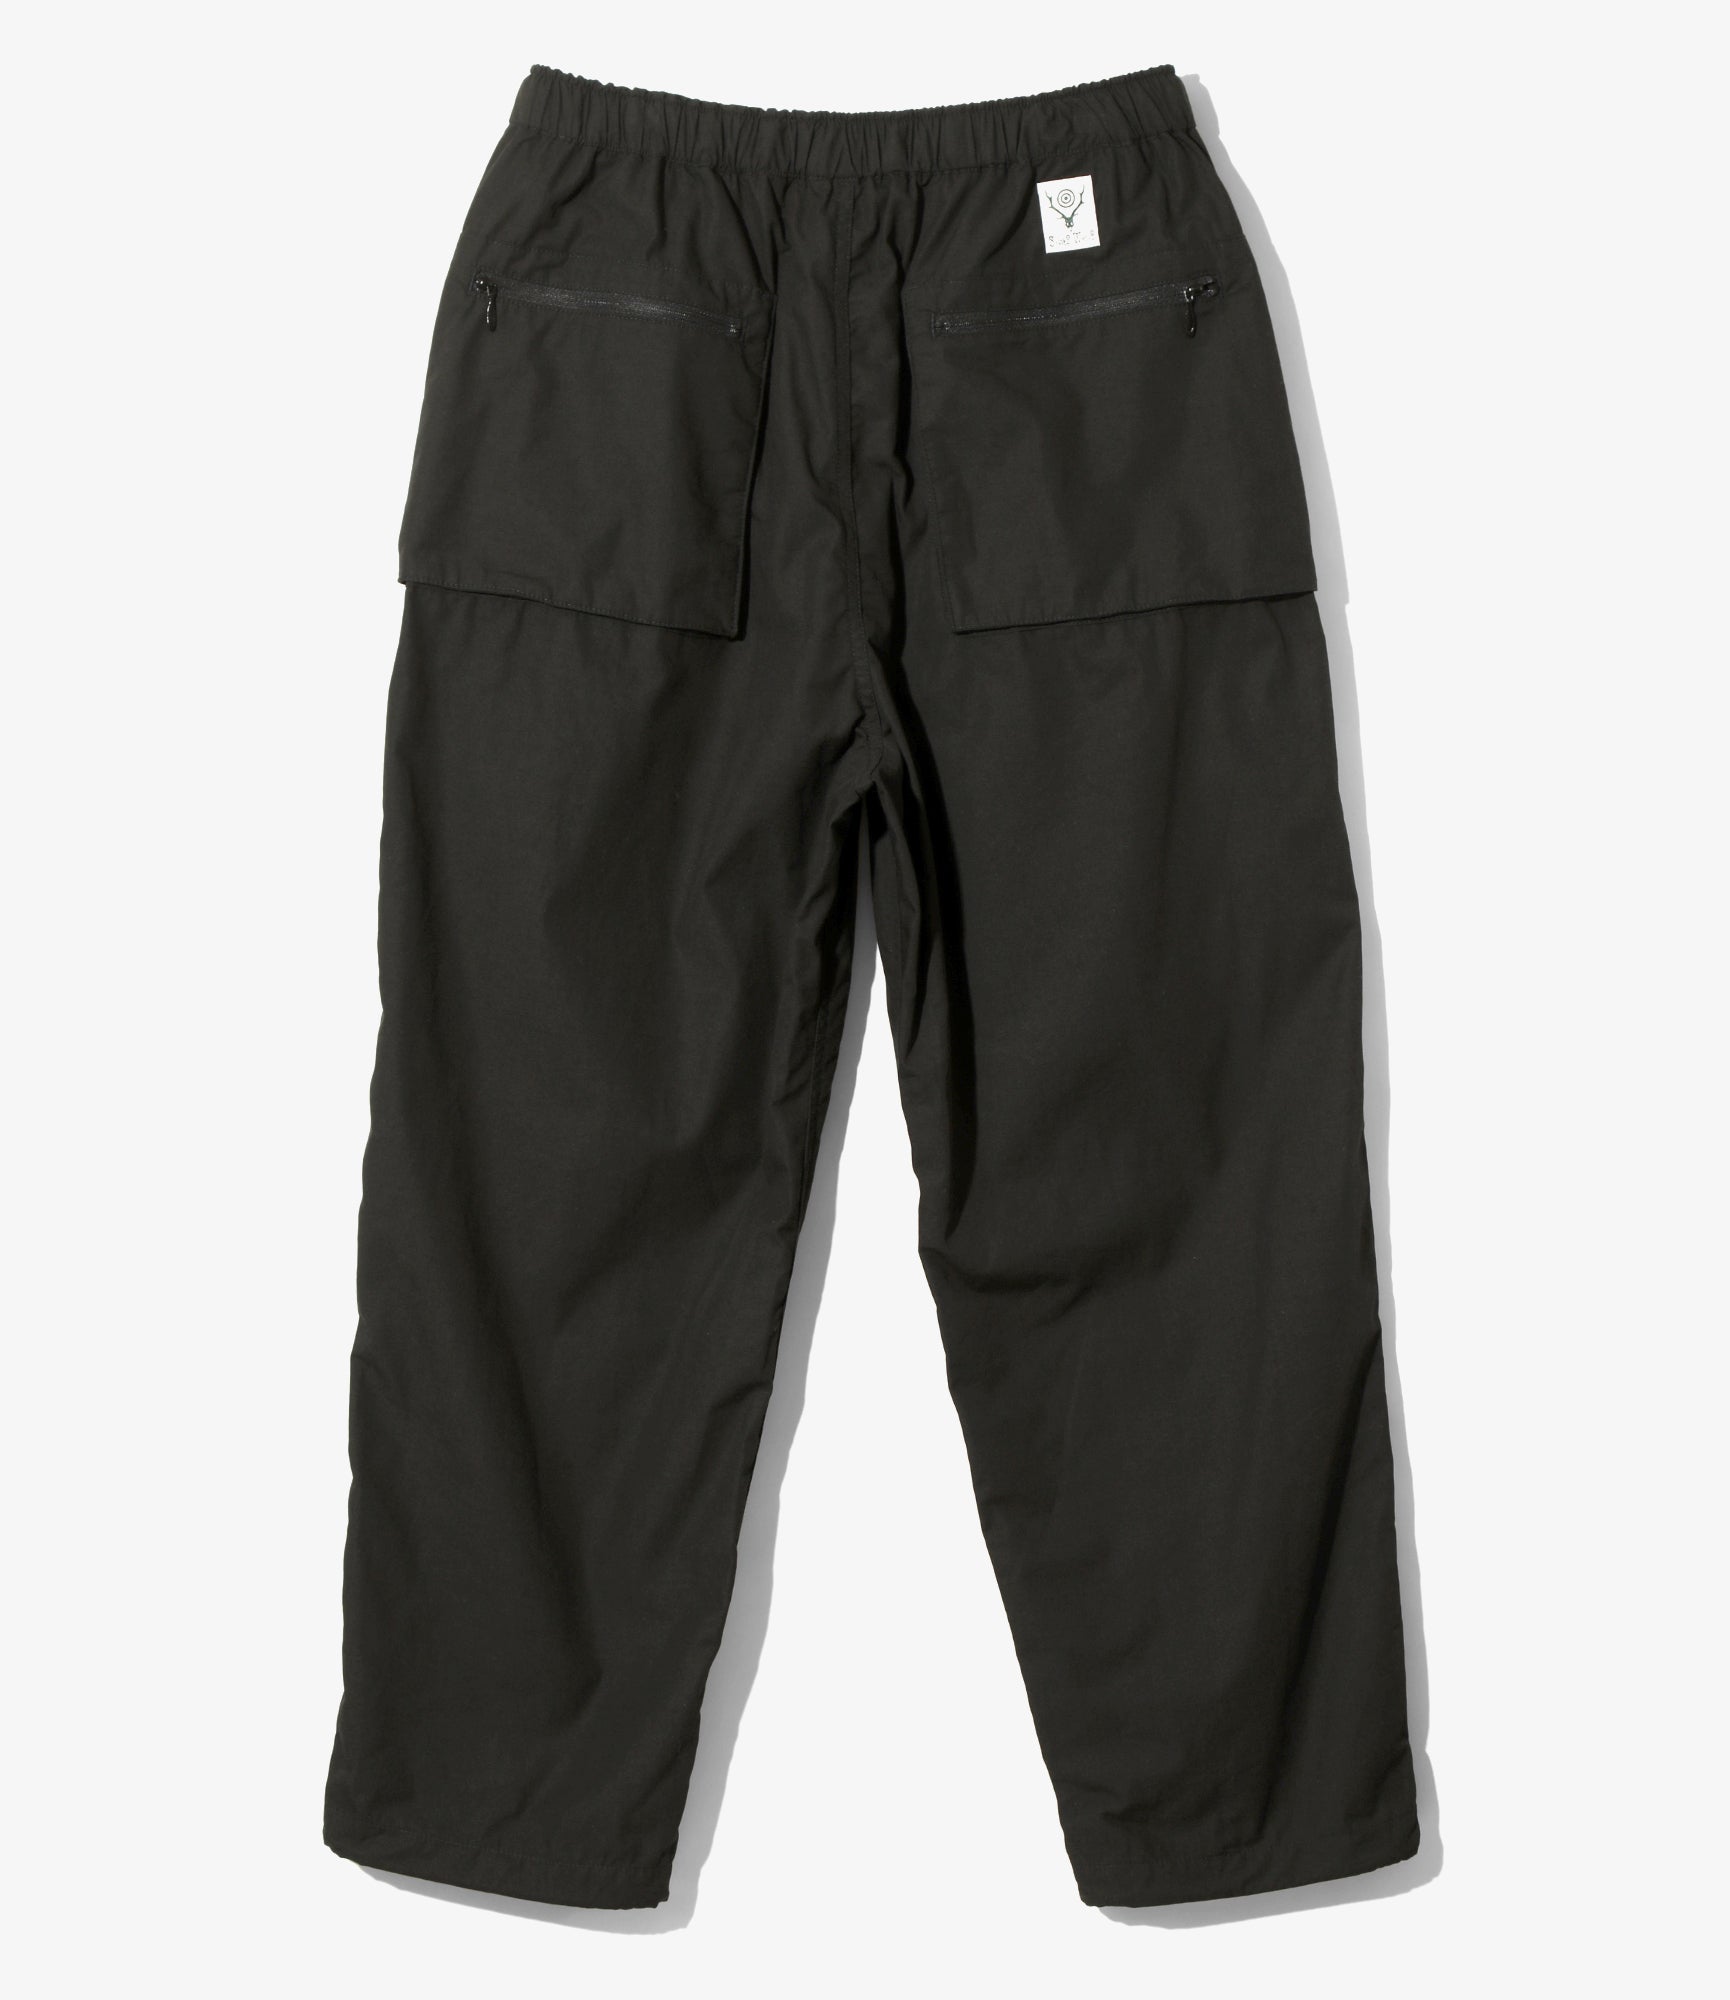 South2 West8 Belted Logger Pant - C/MO Weather Cloth - Black